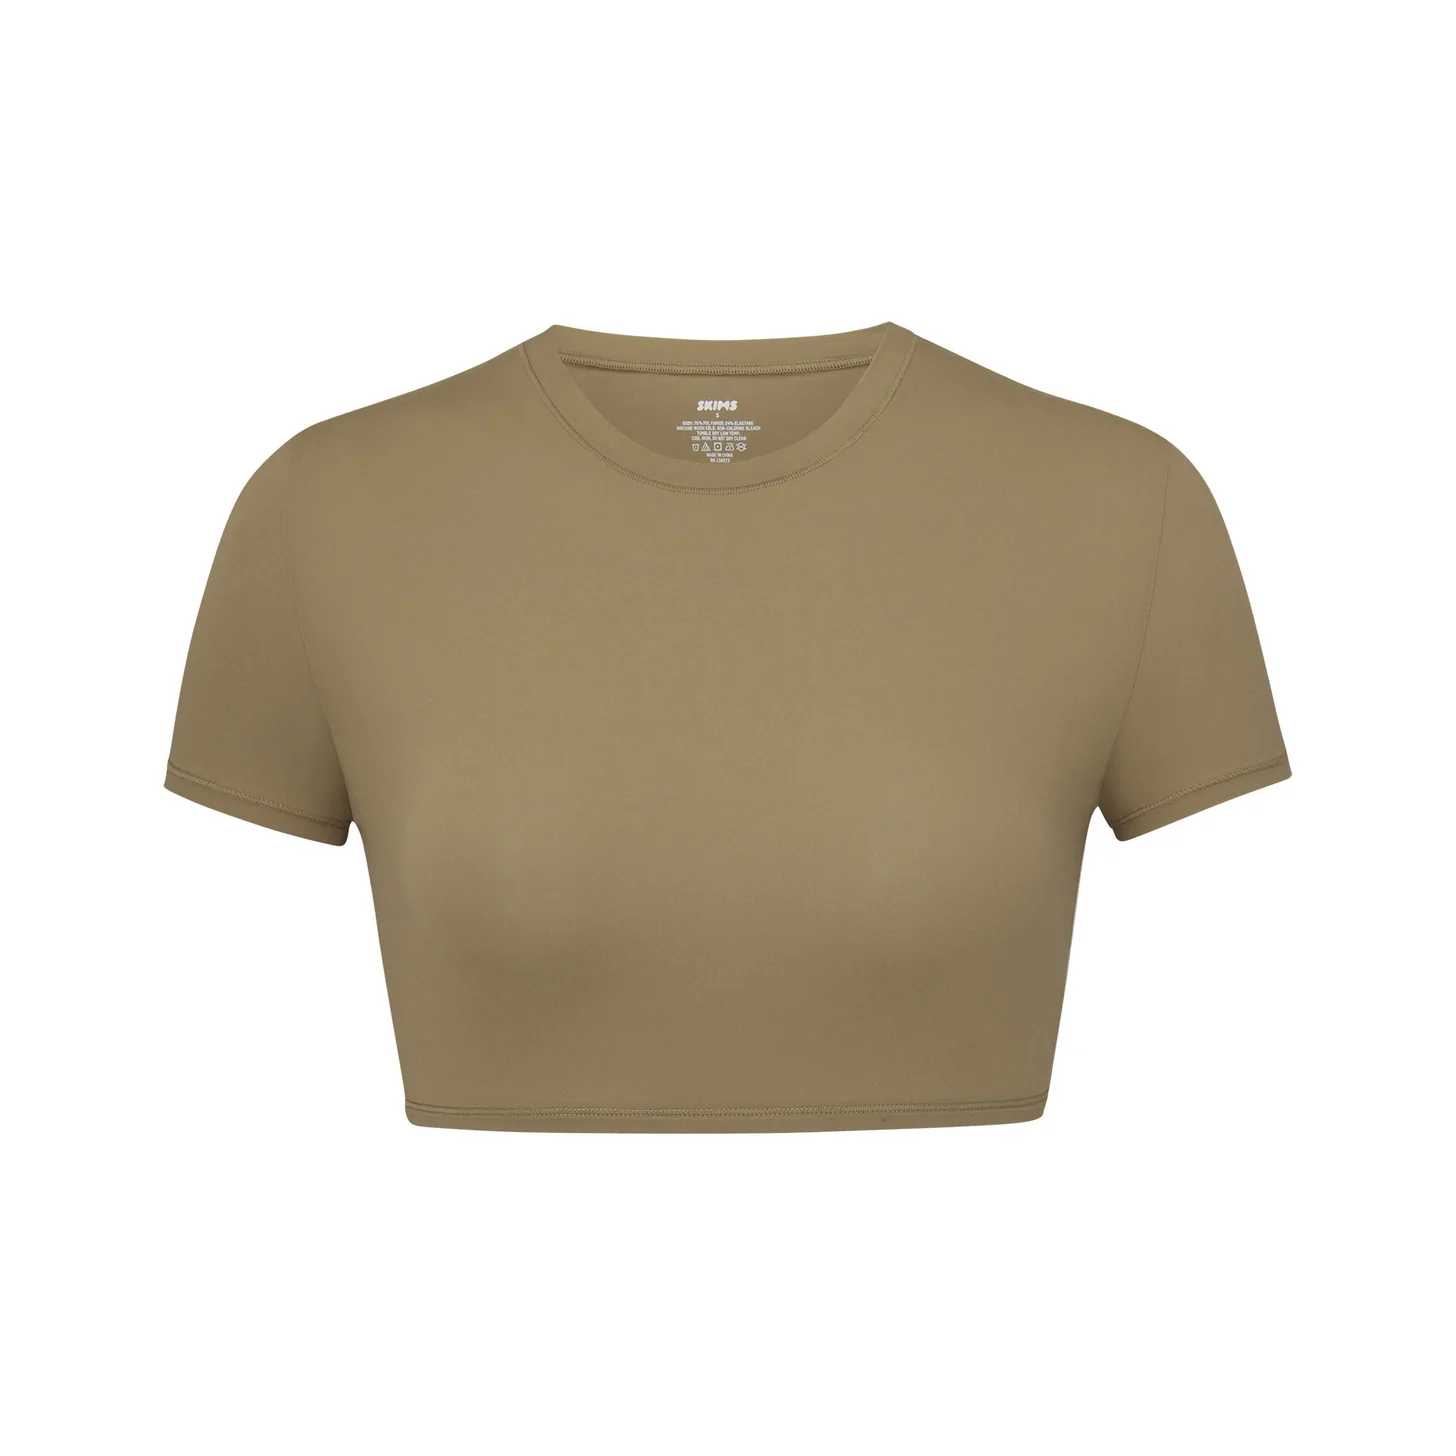 SKIMS on X: JUST DROPPED: FITS EVERYBODY T-SHIRT BRA Our buttery soft Fits  Everybody t-shirt bra is back in two new earthy colors, Marine and Khaki -  plus our classic shade range!